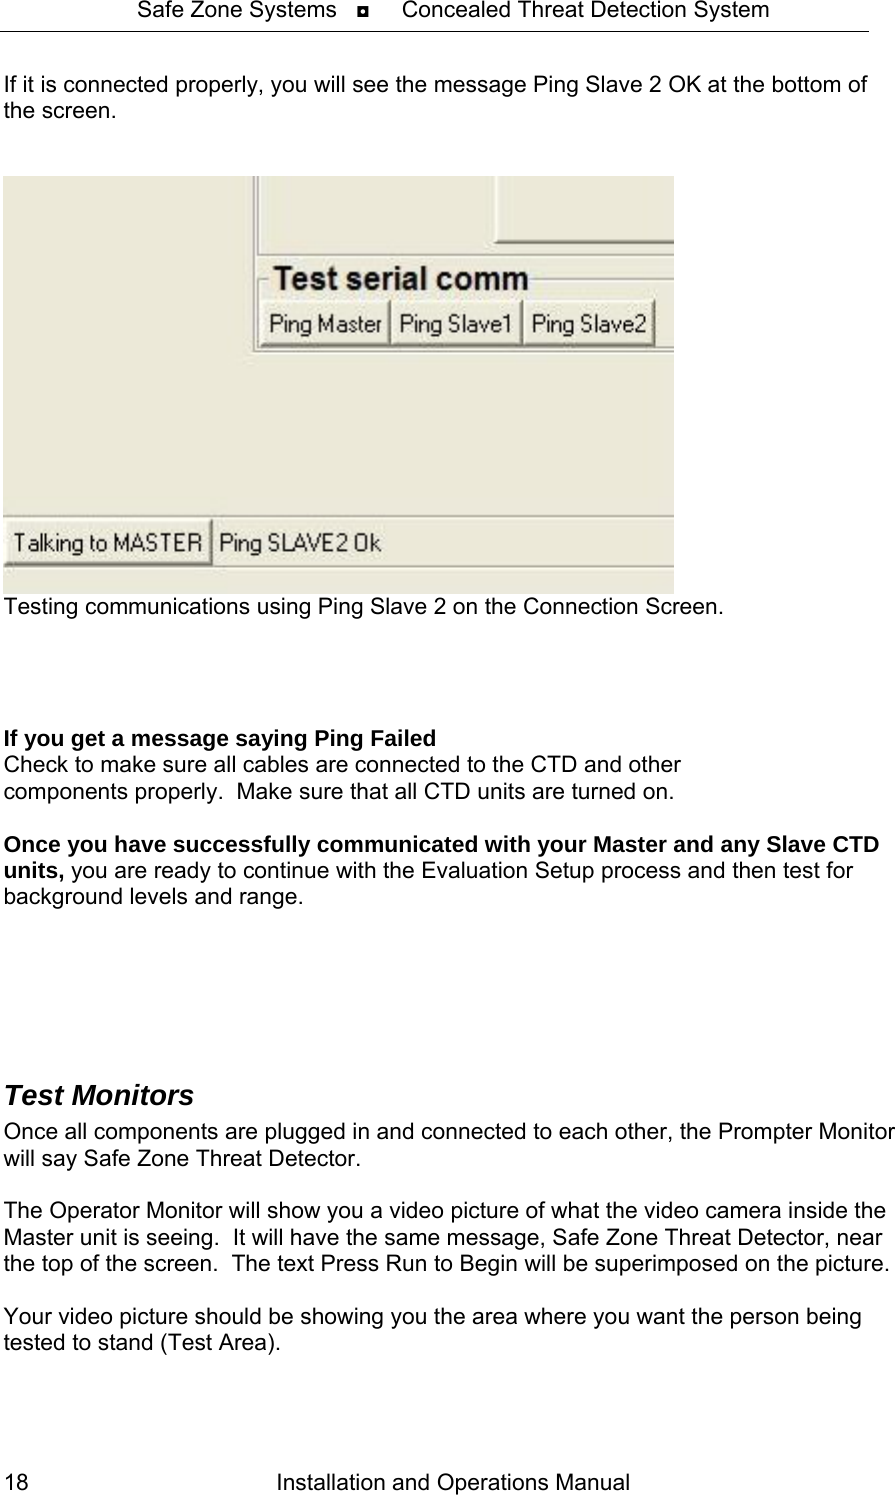 Safe Zone Systems   ◘     Concealed Threat Detection System  If it is connected properly, you will see the message Ping Slave 2 OK at the bottom of the screen.     Testing communications using Ping Slave 2 on the Connection Screen.     If you get a message saying Ping Failed    Check to make sure all cables are connected to the CTD and other components properly.  Make sure that all CTD units are turned on.  Once you have successfully communicated with your Master and any Slave CTD units, you are ready to continue with the Evaluation Setup process and then test for background levels and range.     Test Monitors Once all components are plugged in and connected to each other, the Prompter Monitor will say Safe Zone Threat Detector.    The Operator Monitor will show you a video picture of what the video camera inside the Master unit is seeing.  It will have the same message, Safe Zone Threat Detector, near the top of the screen.  The text Press Run to Begin will be superimposed on the picture.    Your video picture should be showing you the area where you want the person being tested to stand (Test Area).  Installation and Operations Manual 18 